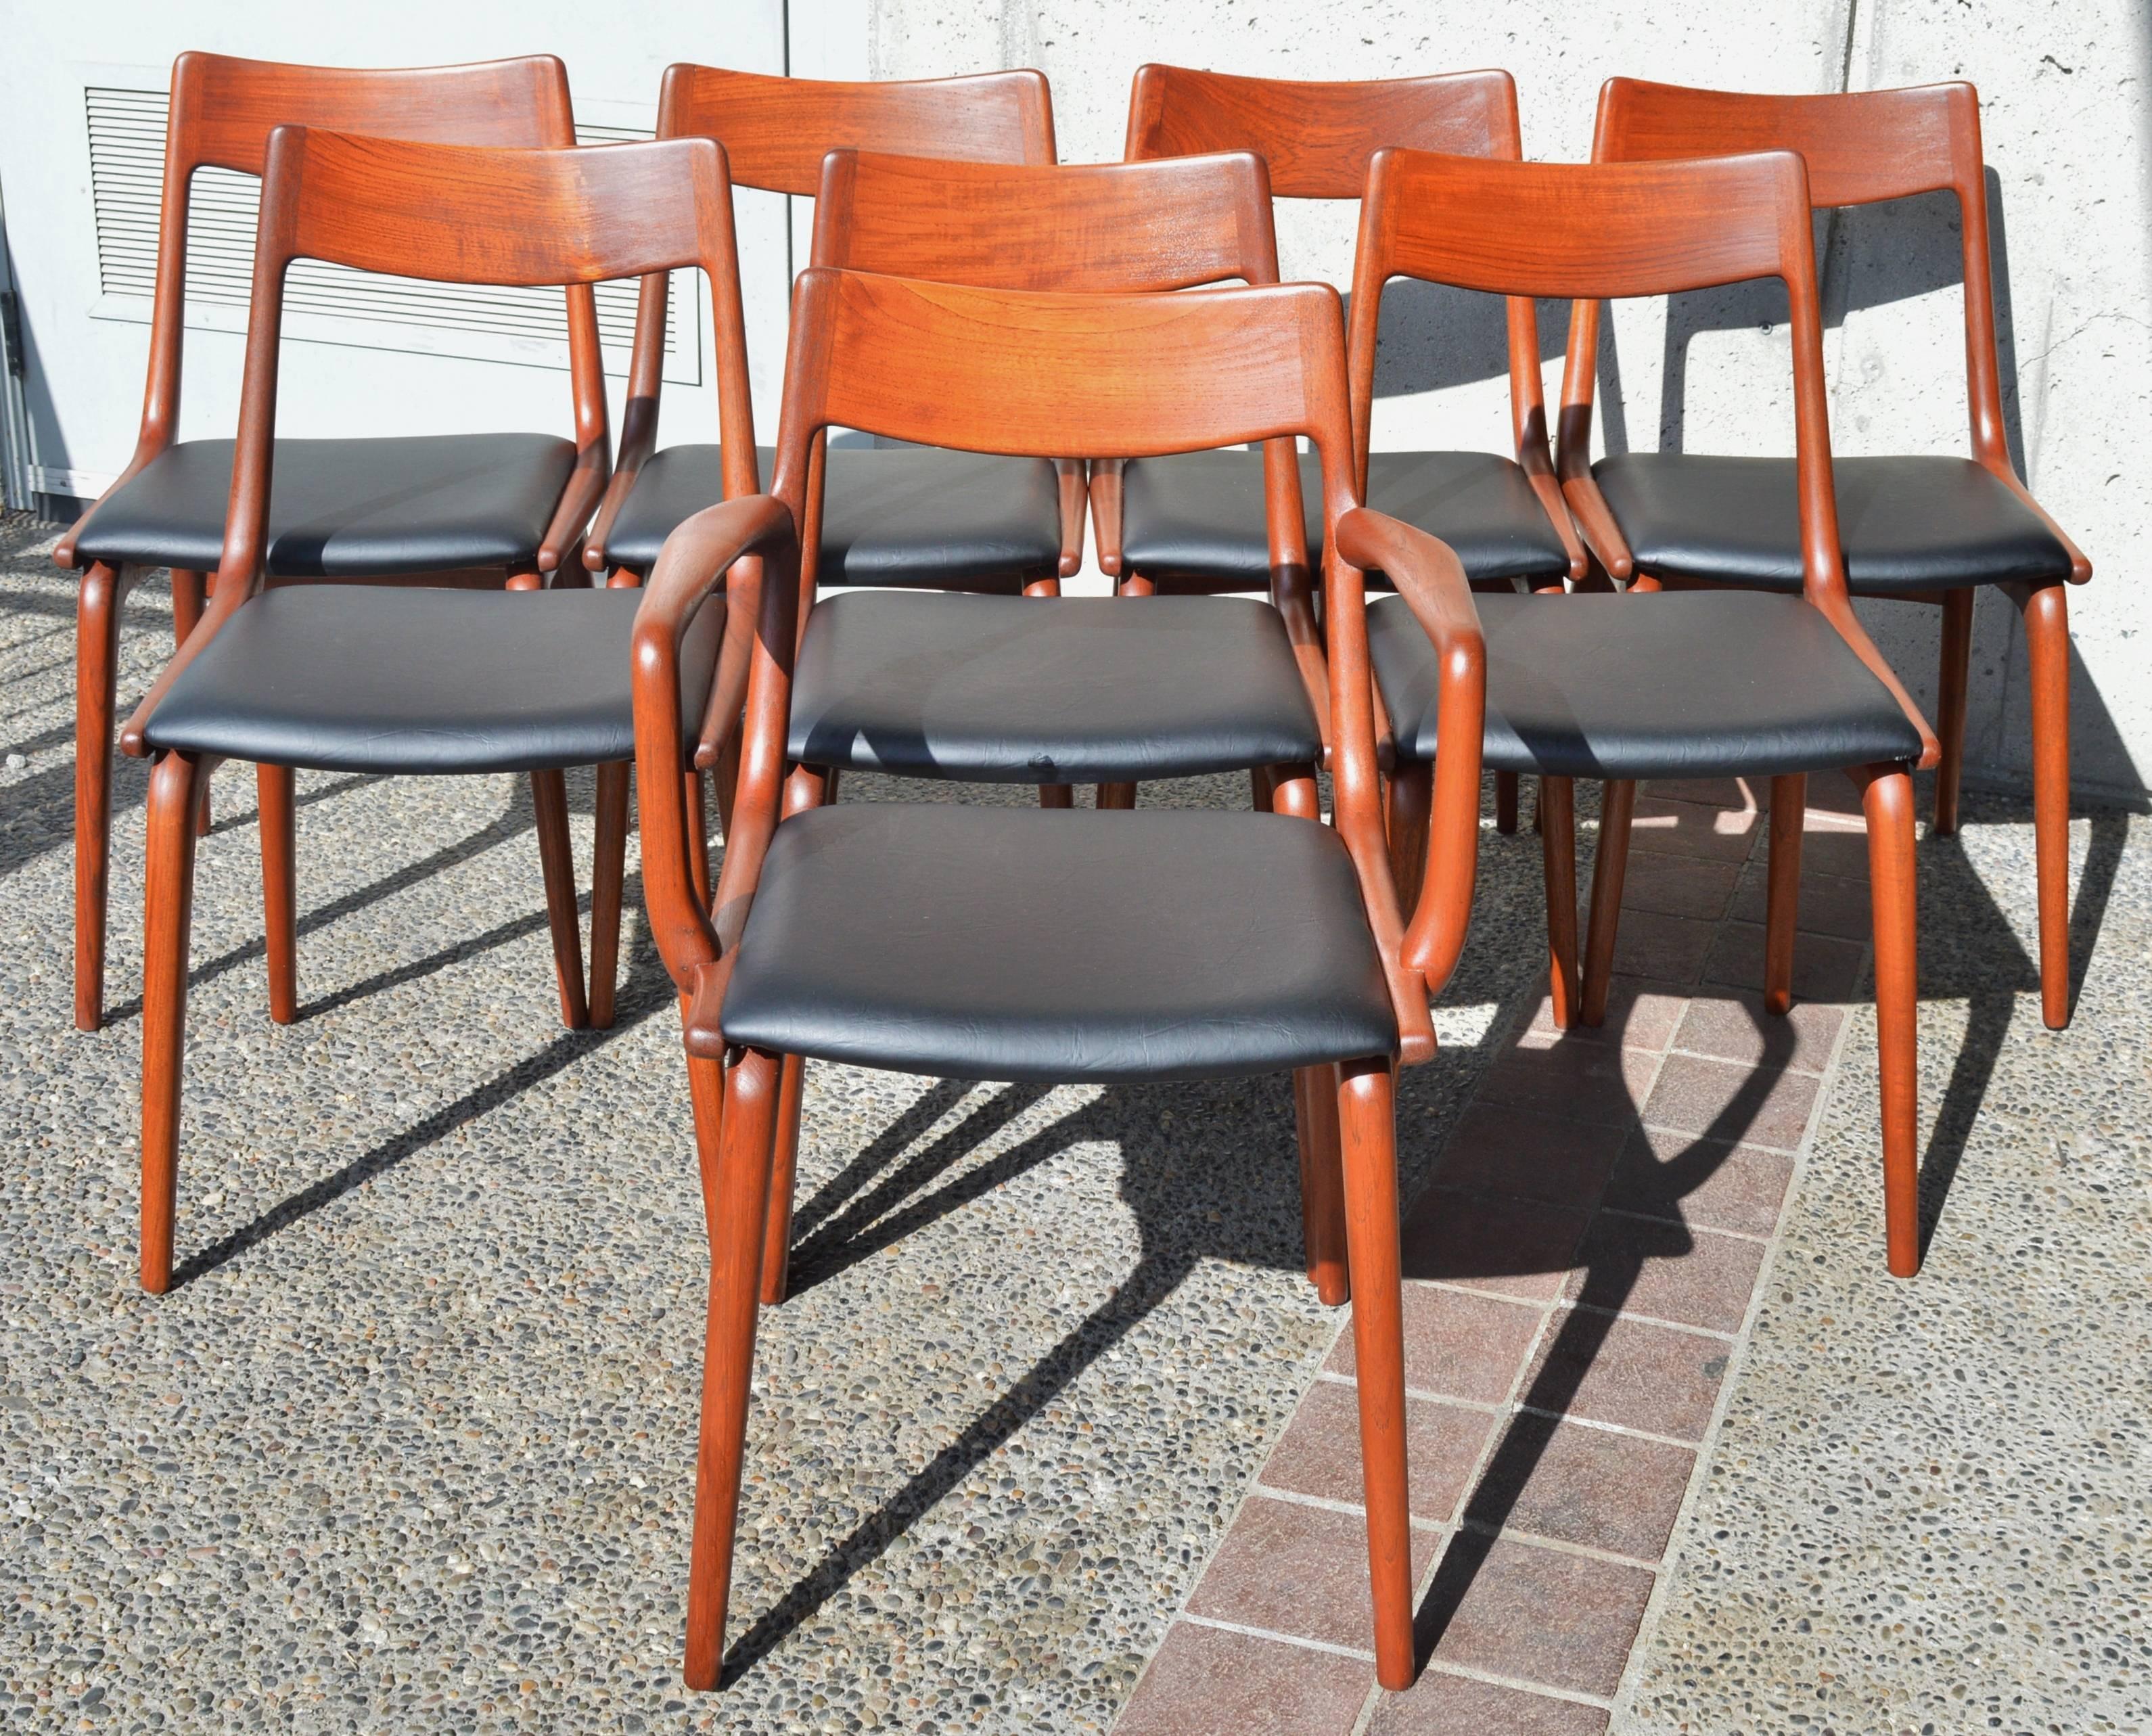 This impeccable set of eight Danish modern teak dining chairs were designed in the 1950s by Erik Christensen for Slagelse Mobelvaerk. Known as the boomerang chair, with it's iconic boomerang shape that runs from the side of the seat up to the